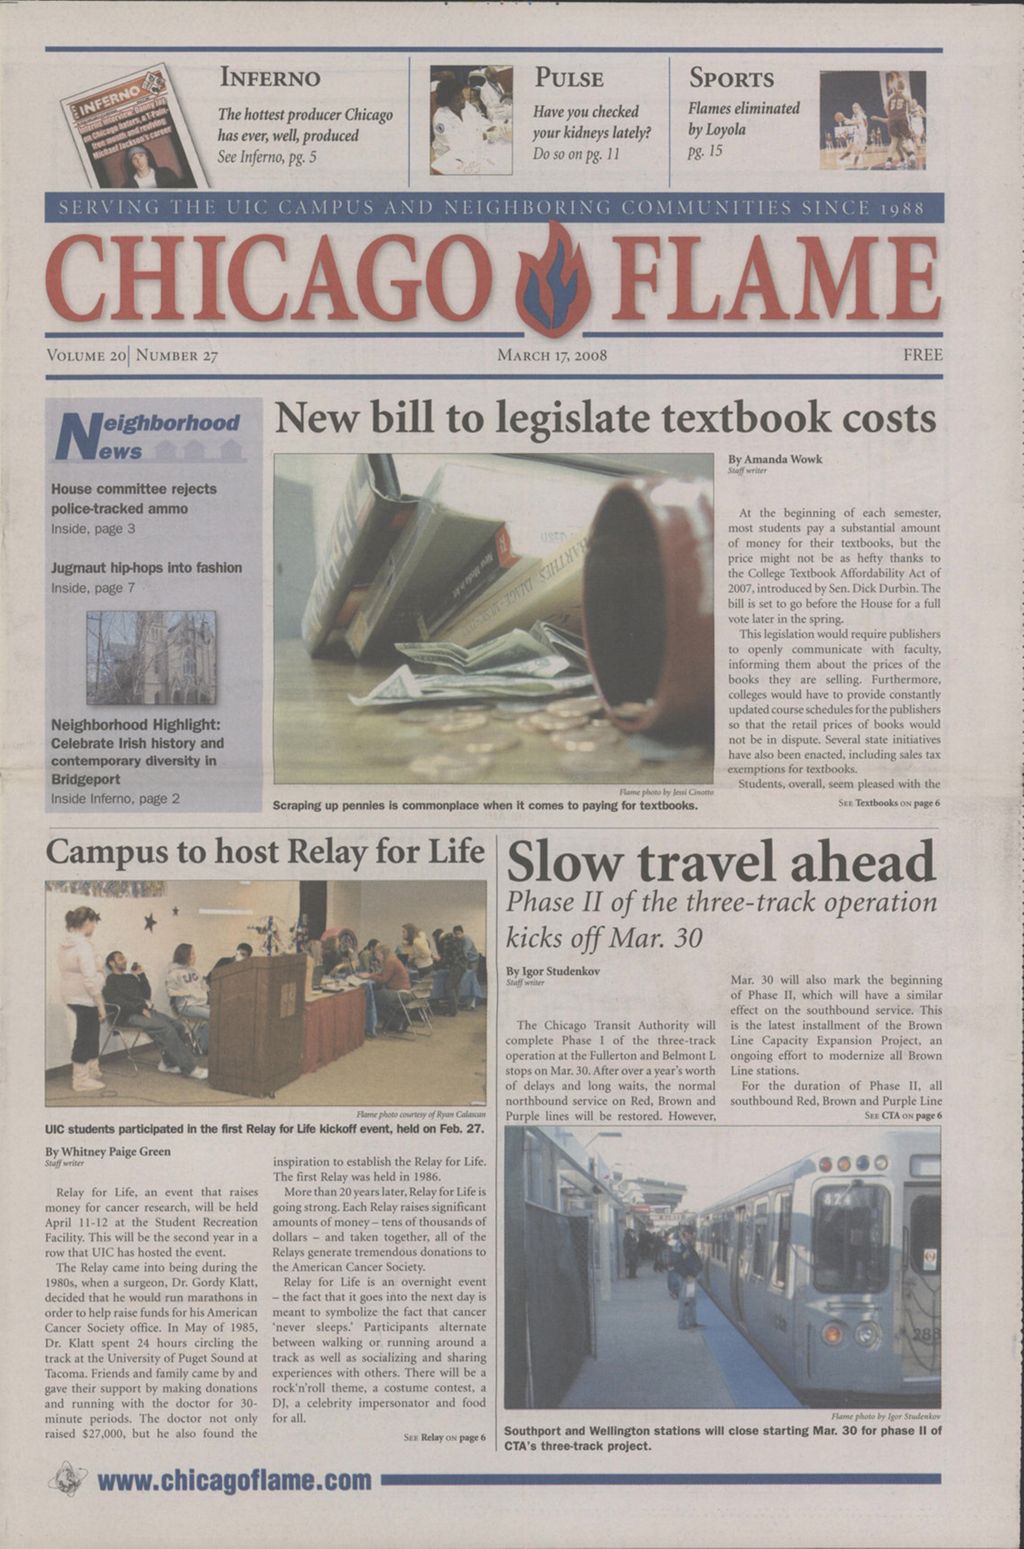 Chicago Flame (March 17, 2008)